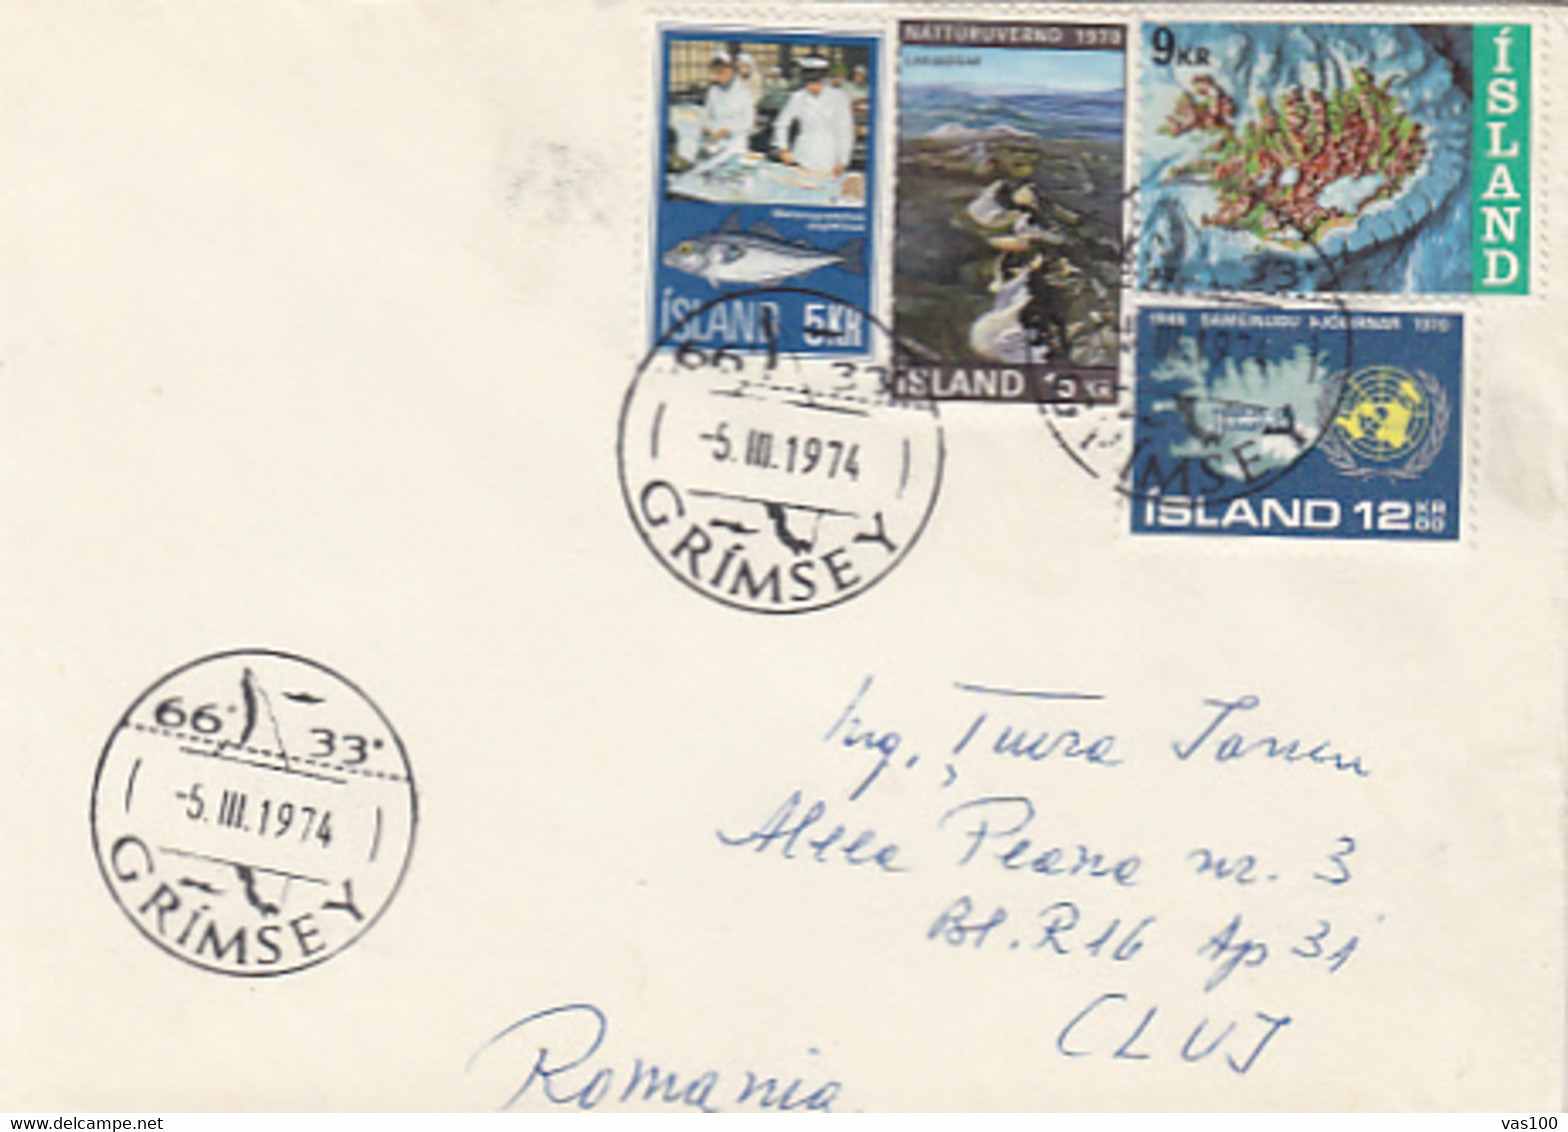 GRIMSAY ISLAND SPECIAL POSTMARK, FISH PROCESSING INDUSTRY, ISLAND VEWS STAMPS ON COVER, 1974, ICELAND - Briefe U. Dokumente